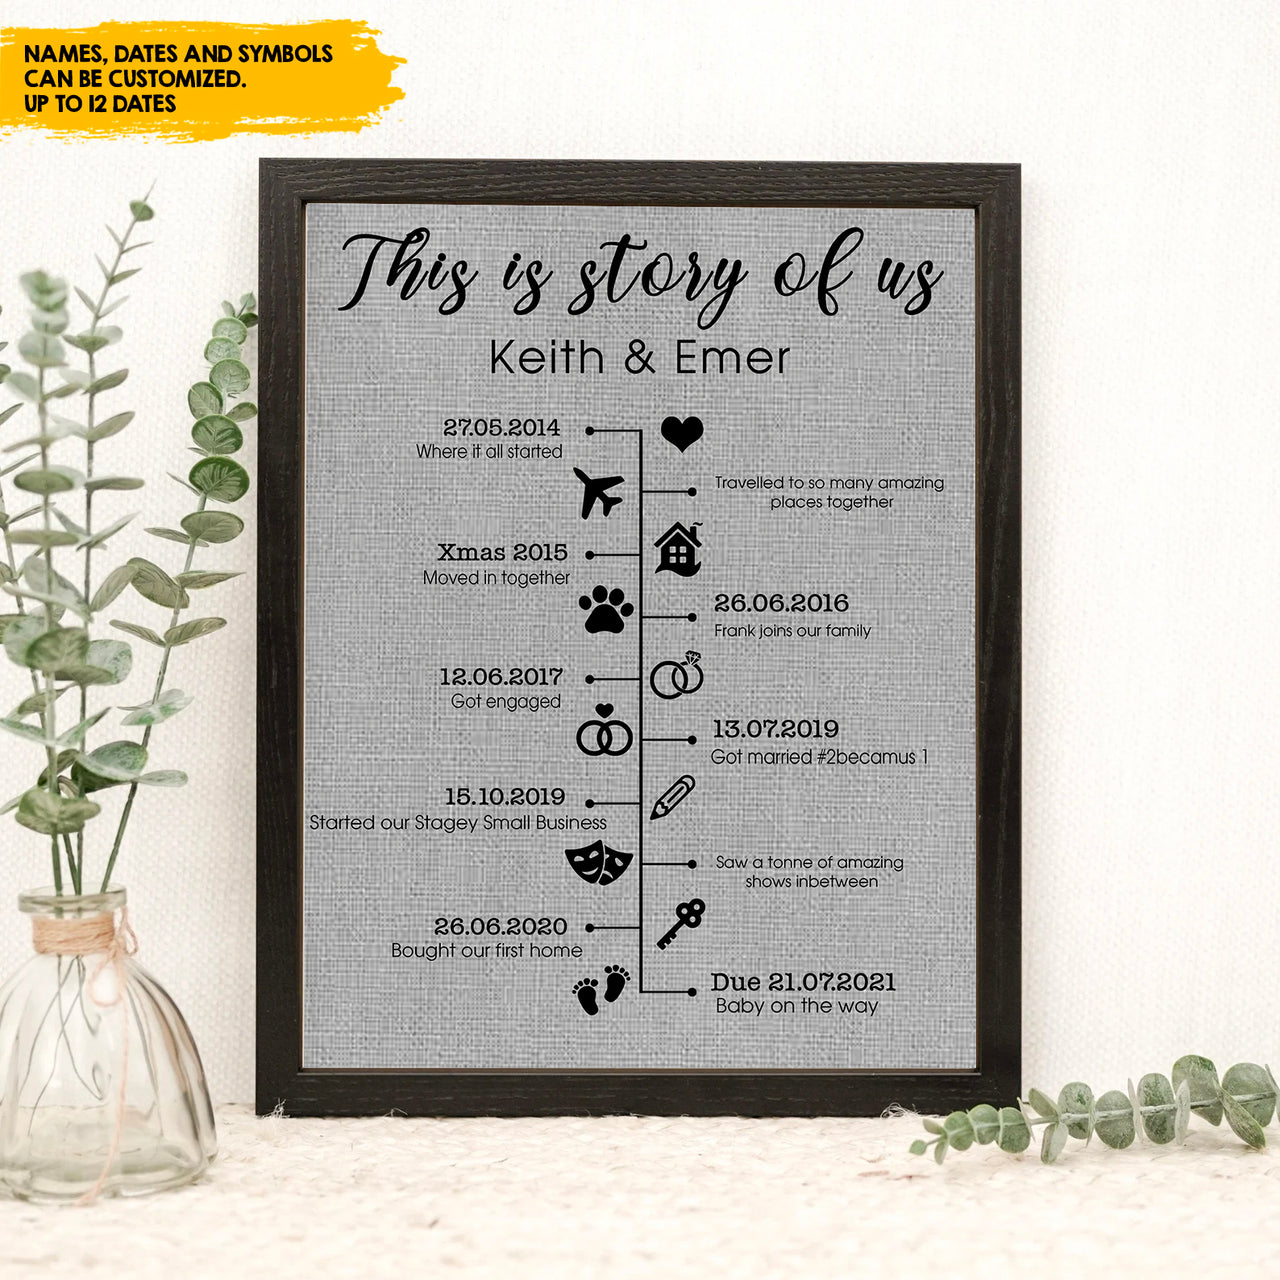 This Is Story Of Us Timeline Personalized Photo Frame AA